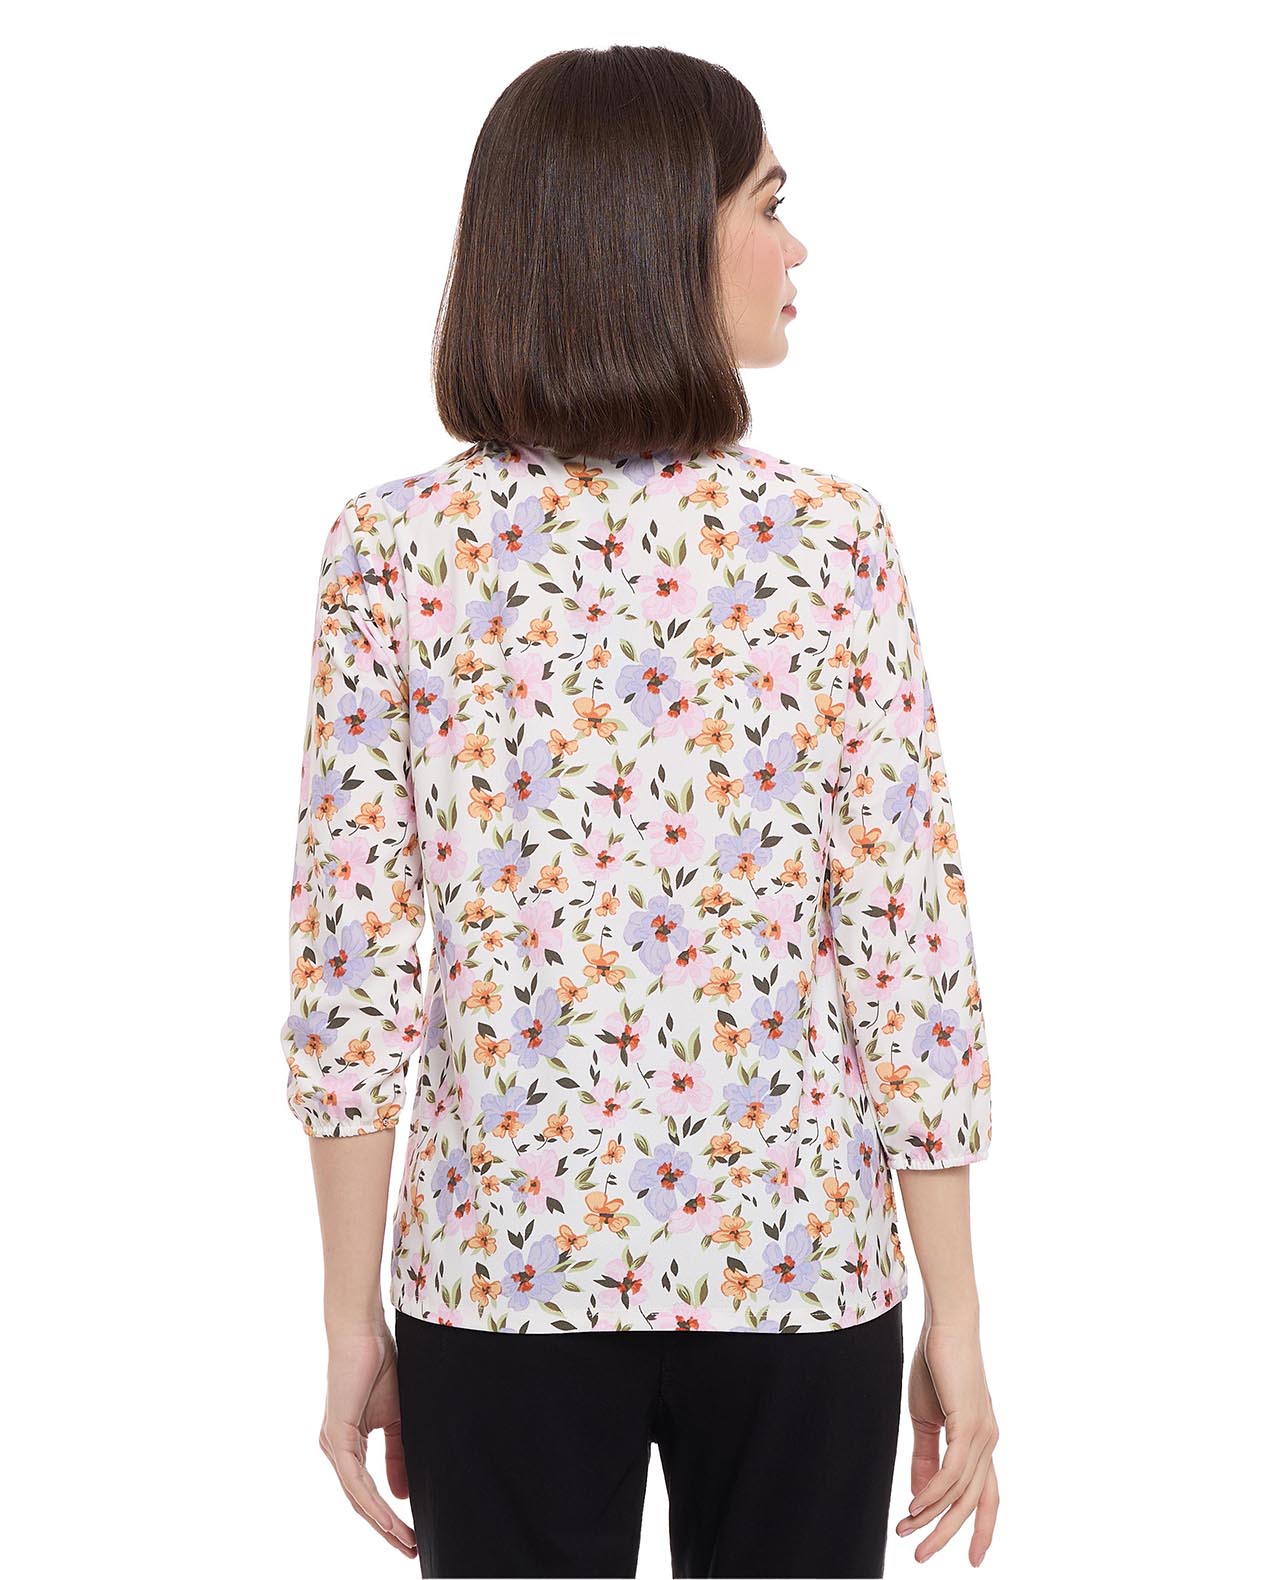 Floral Patterned Top with Tie-Up Neck and 3/4 Sleeves